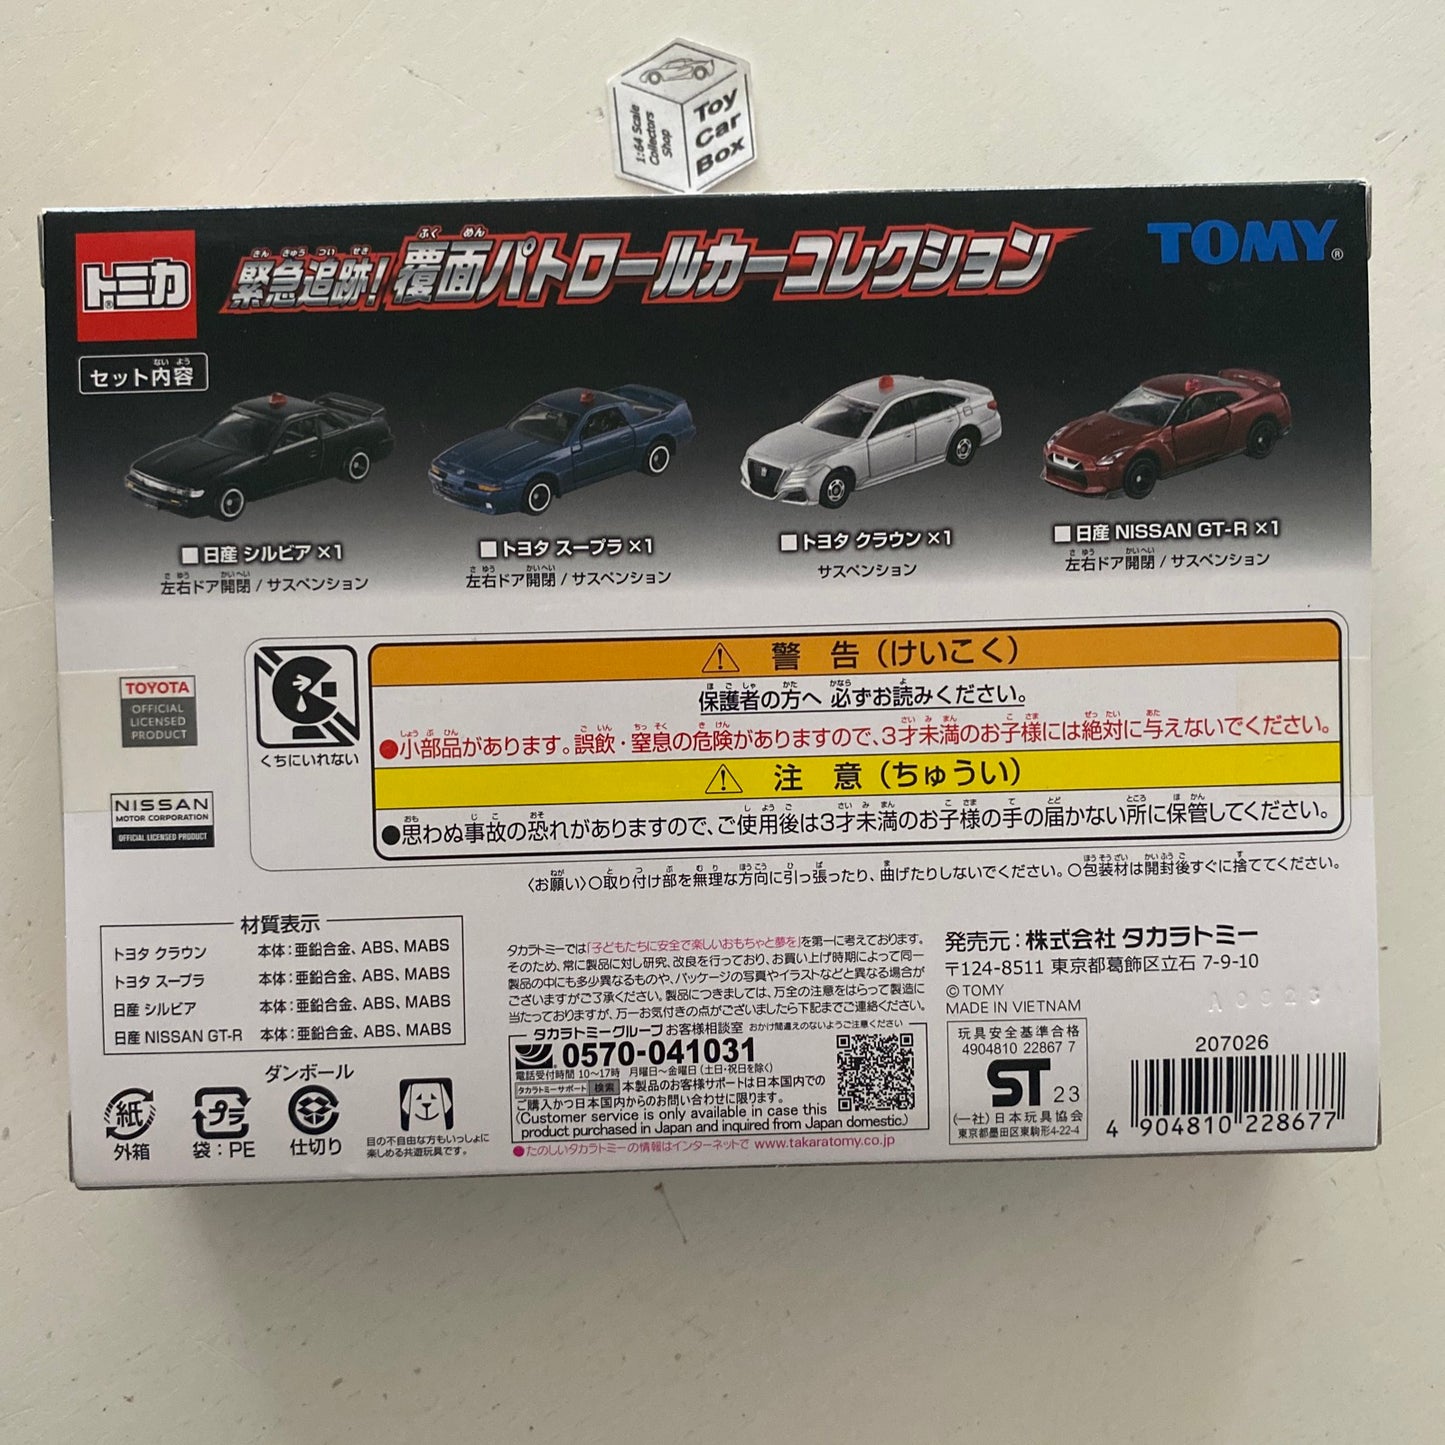 TOMICA Emergency Vehicles Collection (Supra, Silvia, Nissan GT-R & Crown) R38